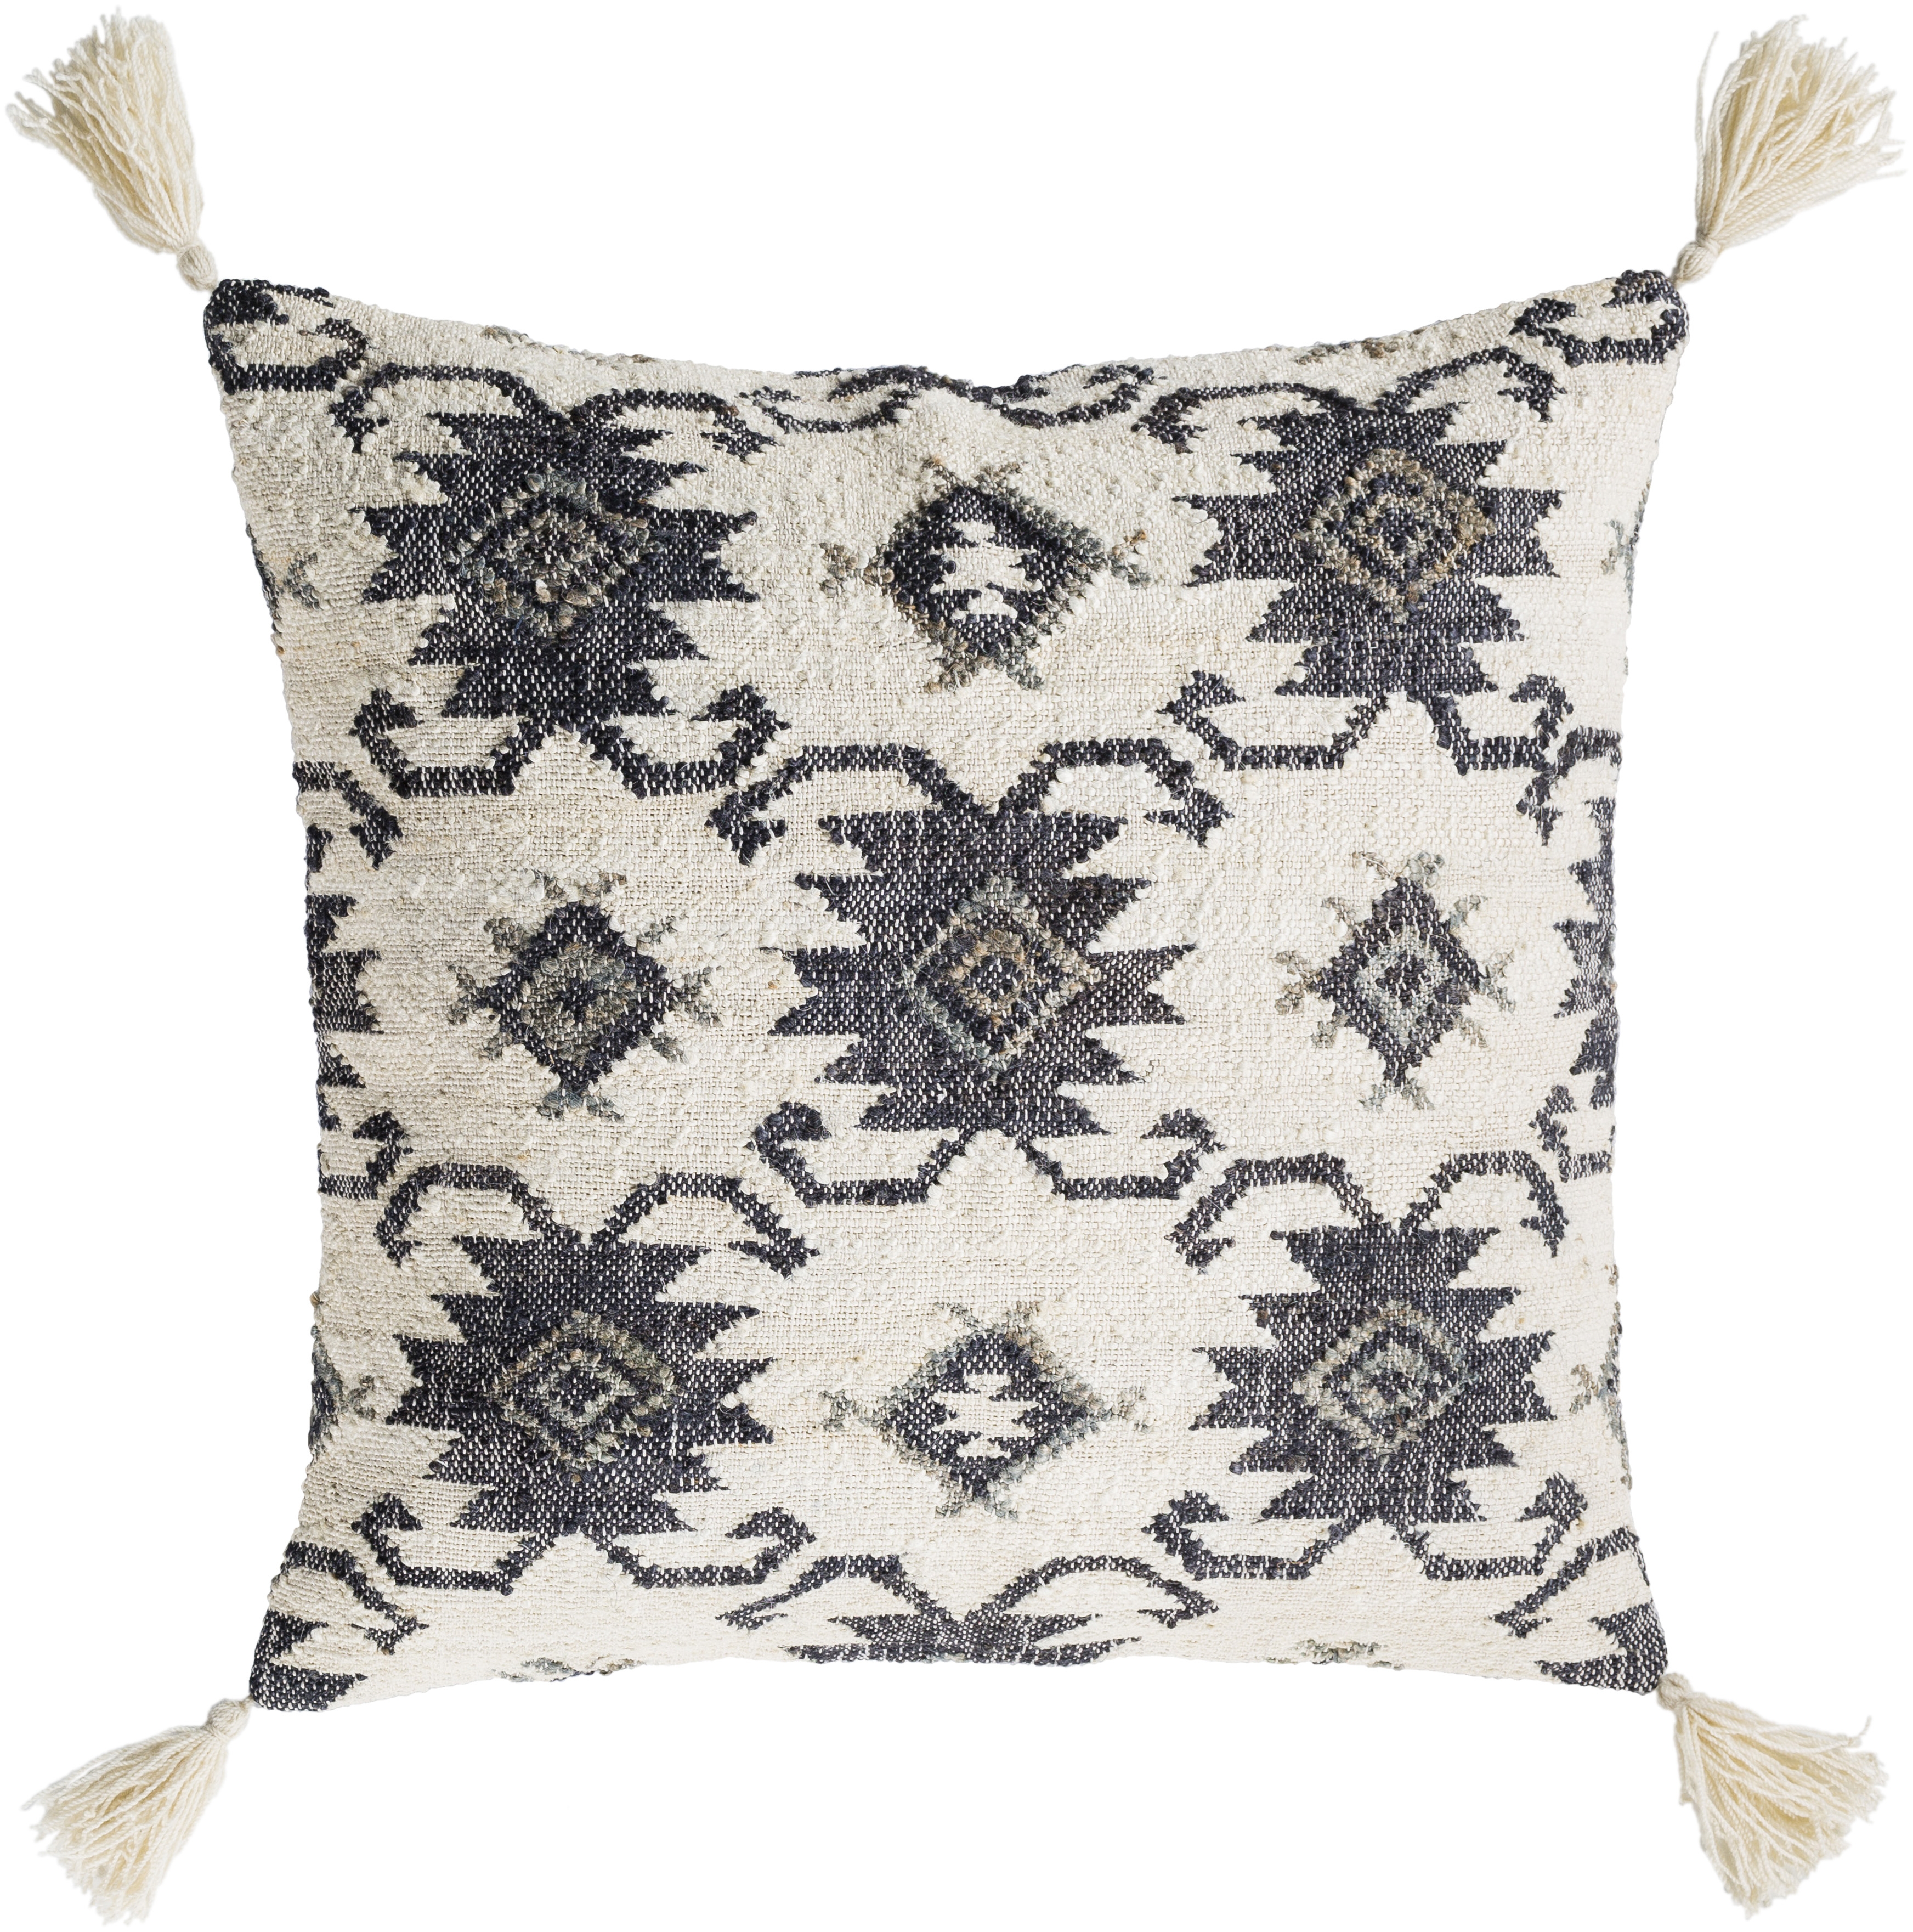 Lenora Throw Pillow, 20" x 20", pillow cover only - Image 0